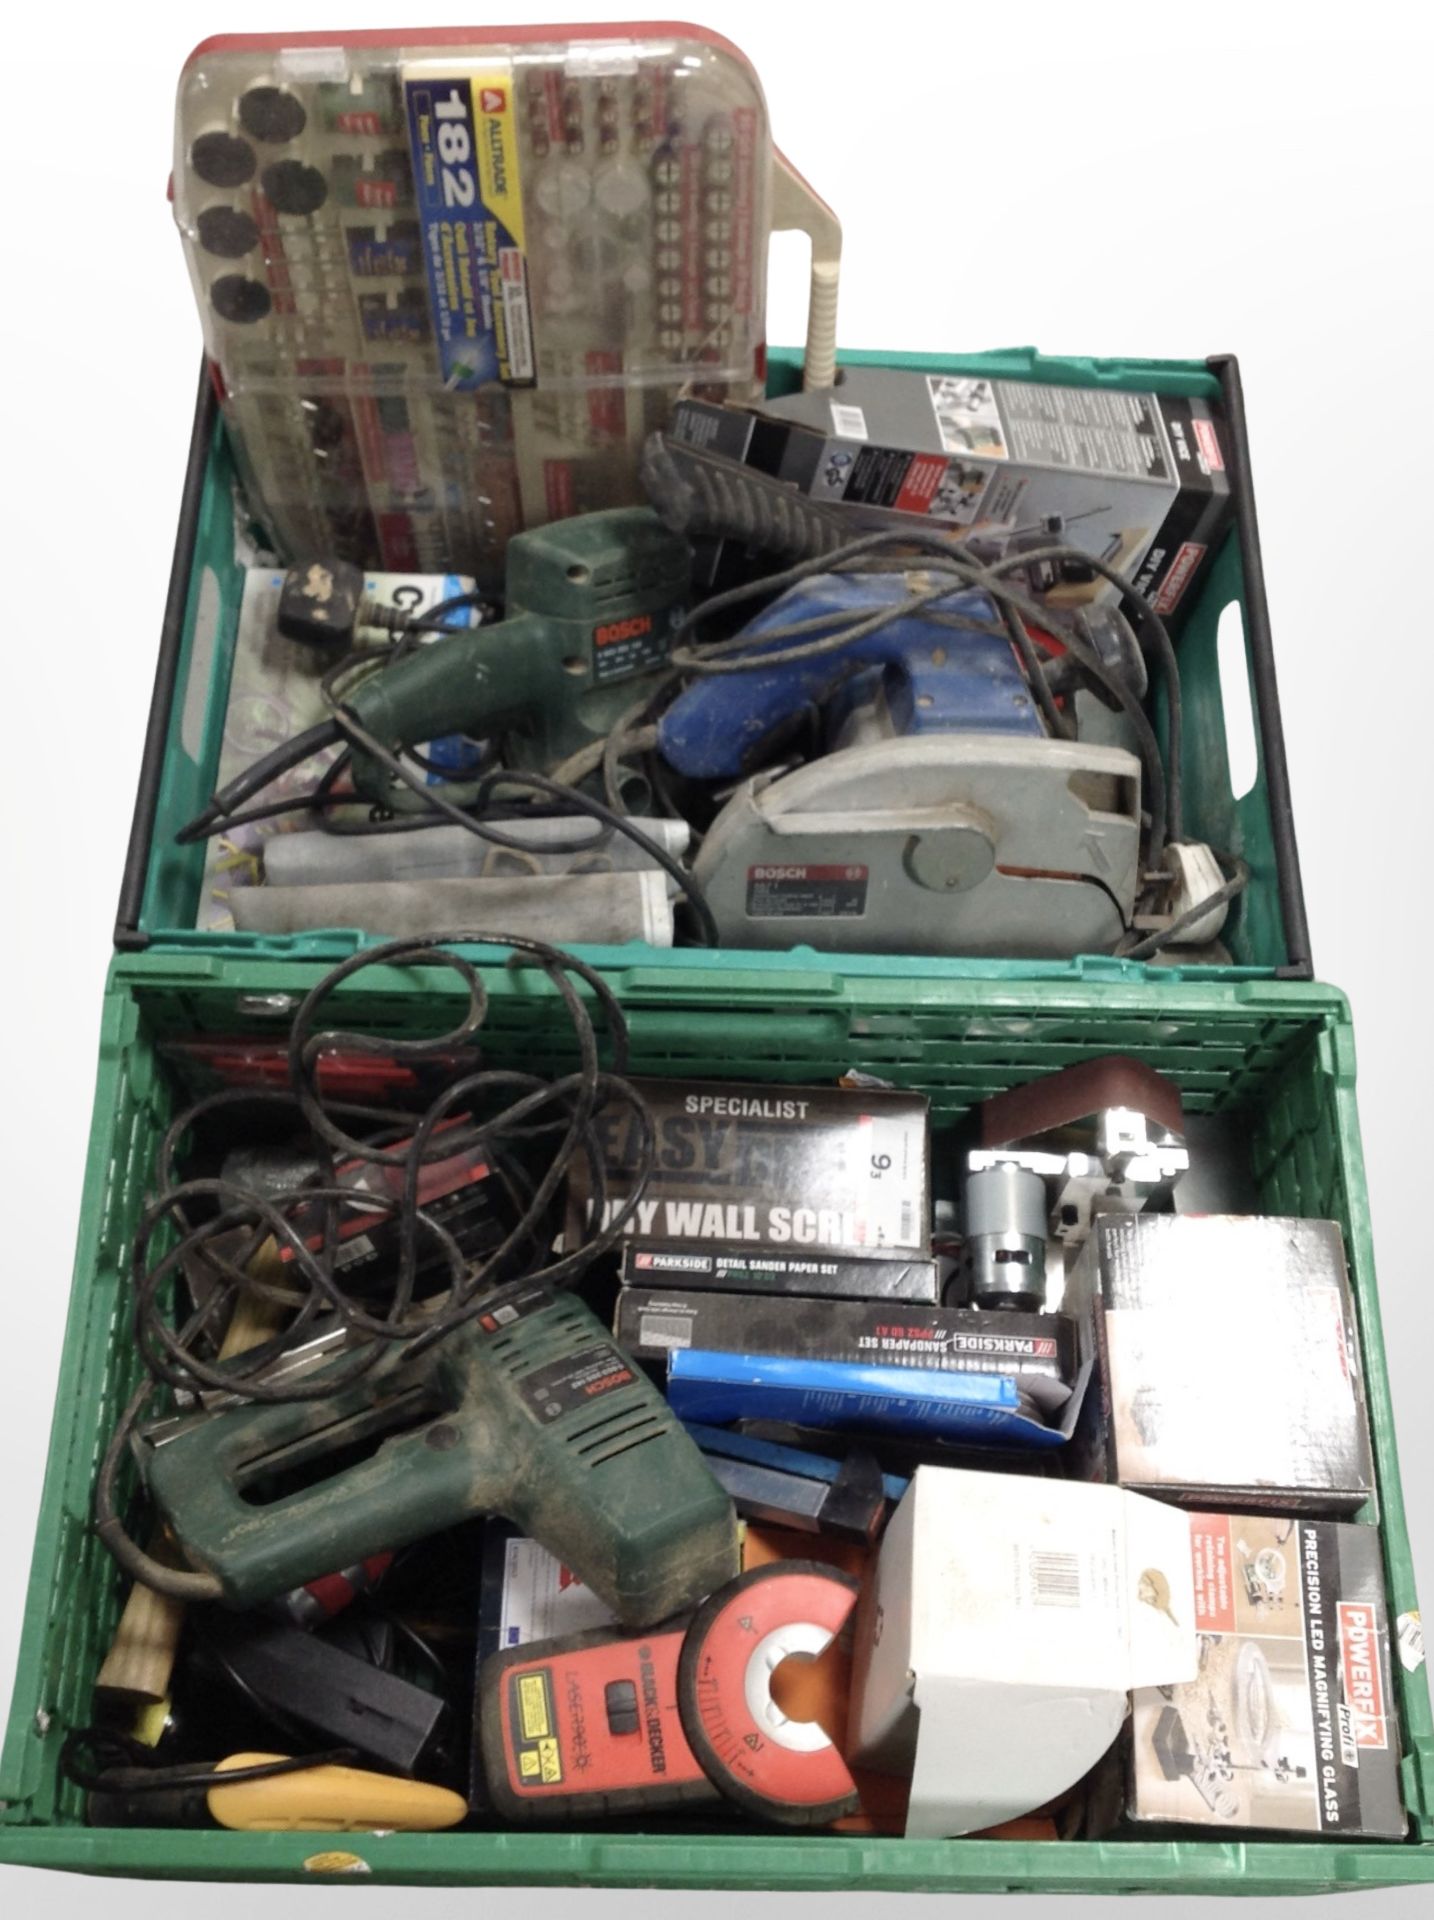 Two crates containing assorted power tools, LED magnifying glasses, rotary tool accessory set, etc.